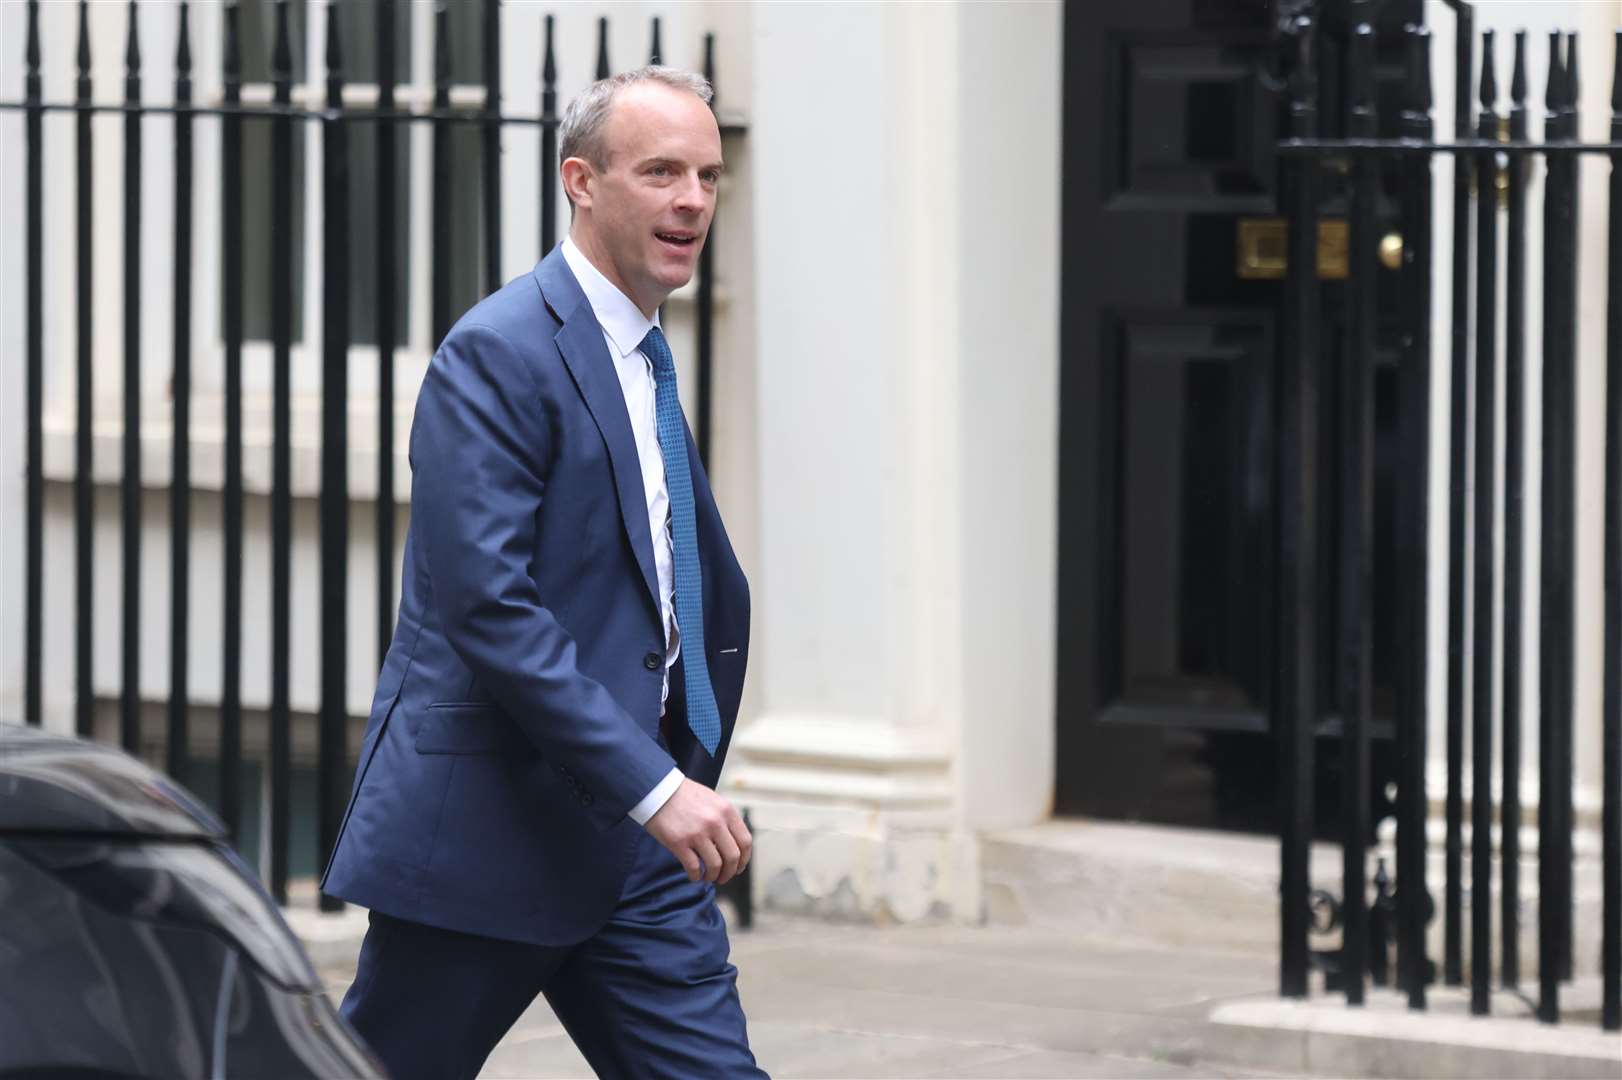 Mr Raab pledged transparency over the report (James Manning/PA)